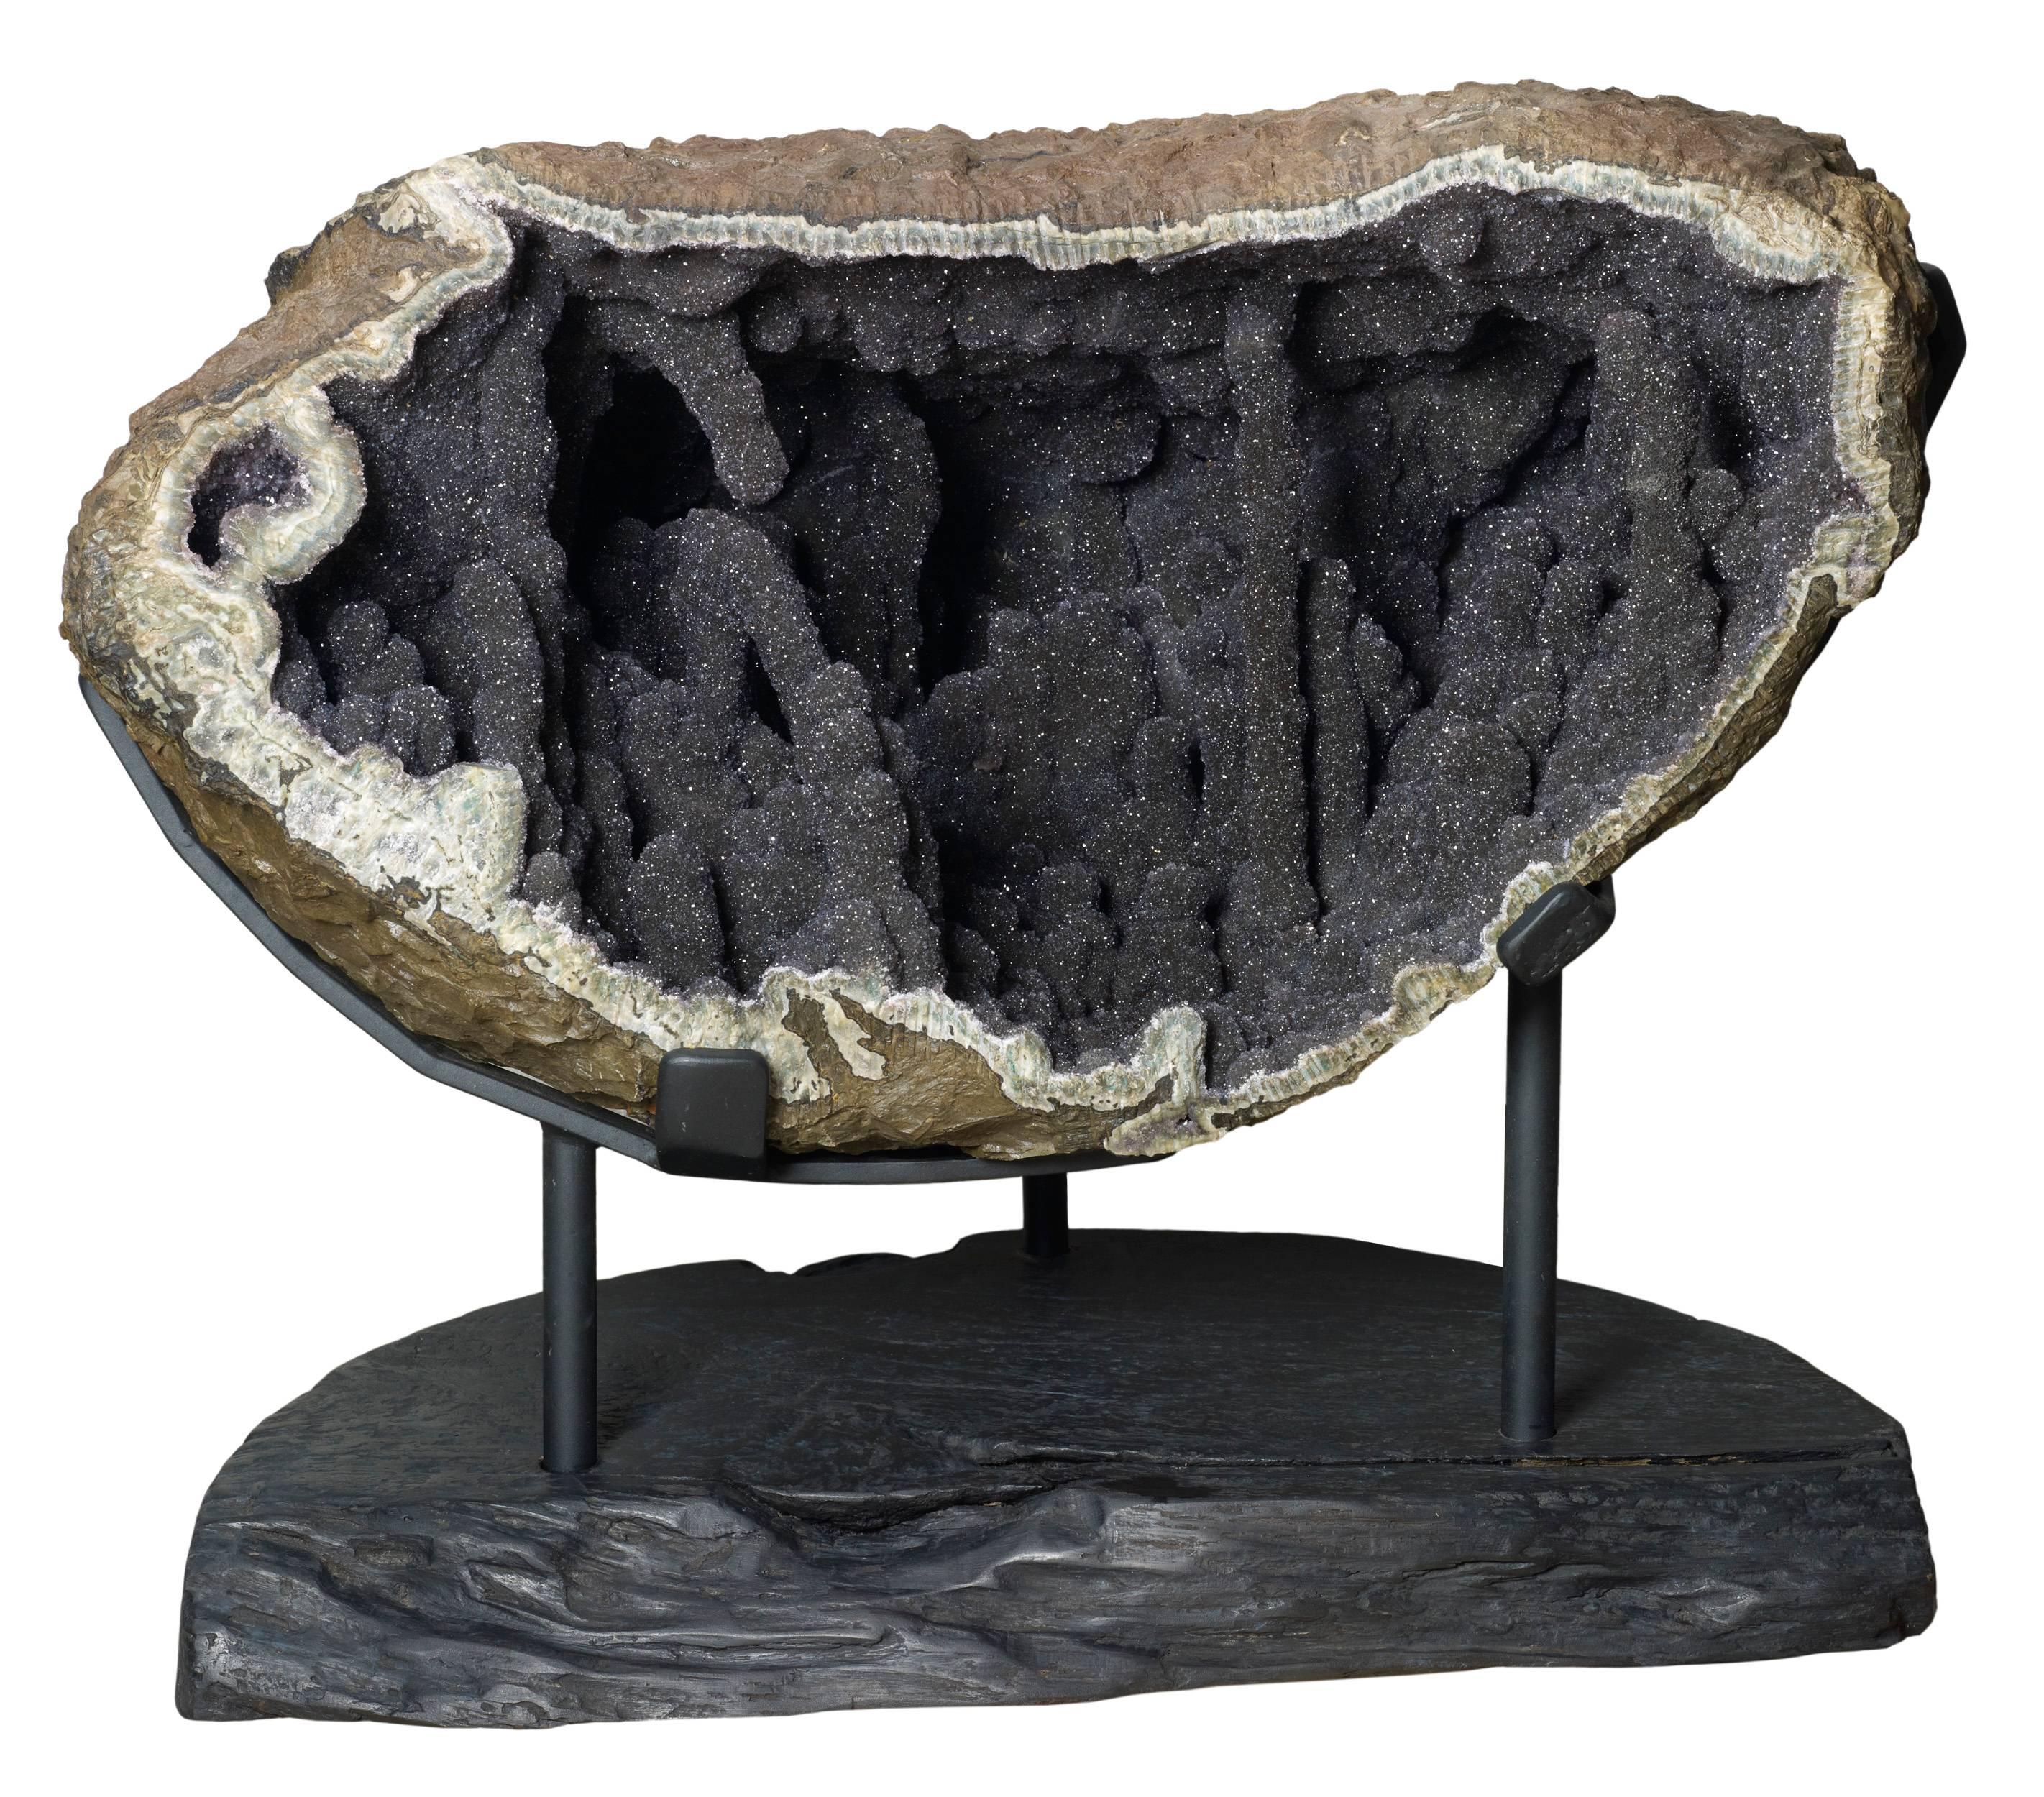 A beautiful and unique geode of stalactites of clear quartz over black jasper. Difficult to find a large one like this: Measures: 72 x 84 x 57 on a decorative stand made by hand to fit perfectly. This rare deco crystal will harmonize end embellish